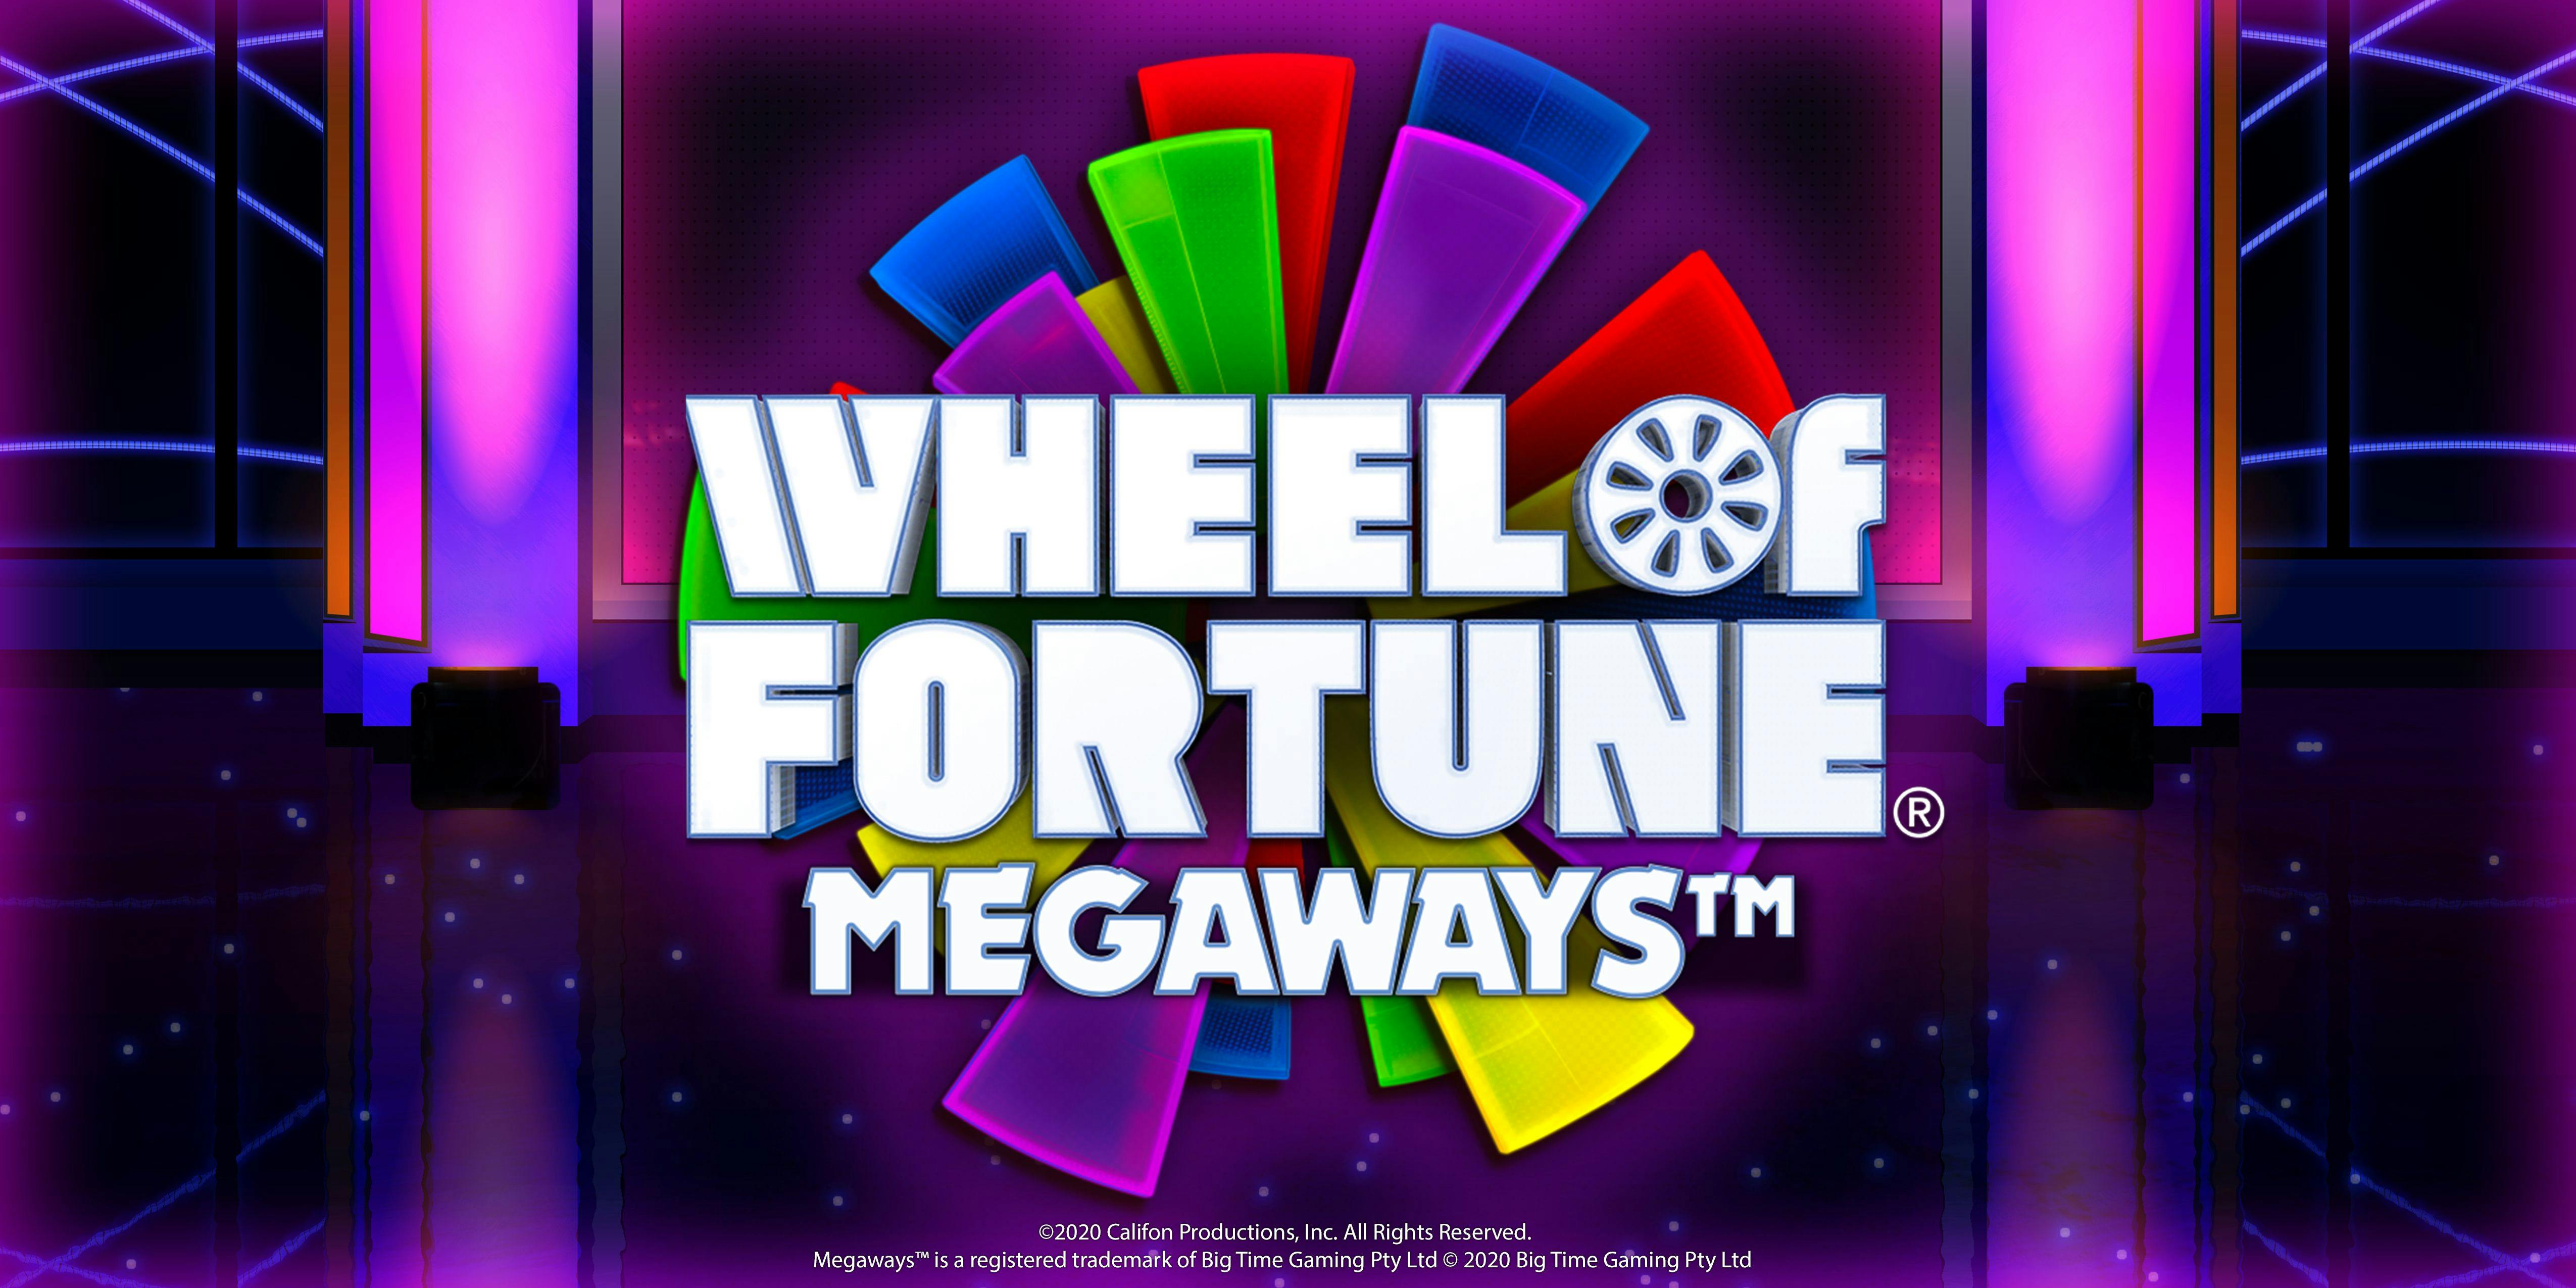 How to Play Wheel of Fortune Online Game for Free